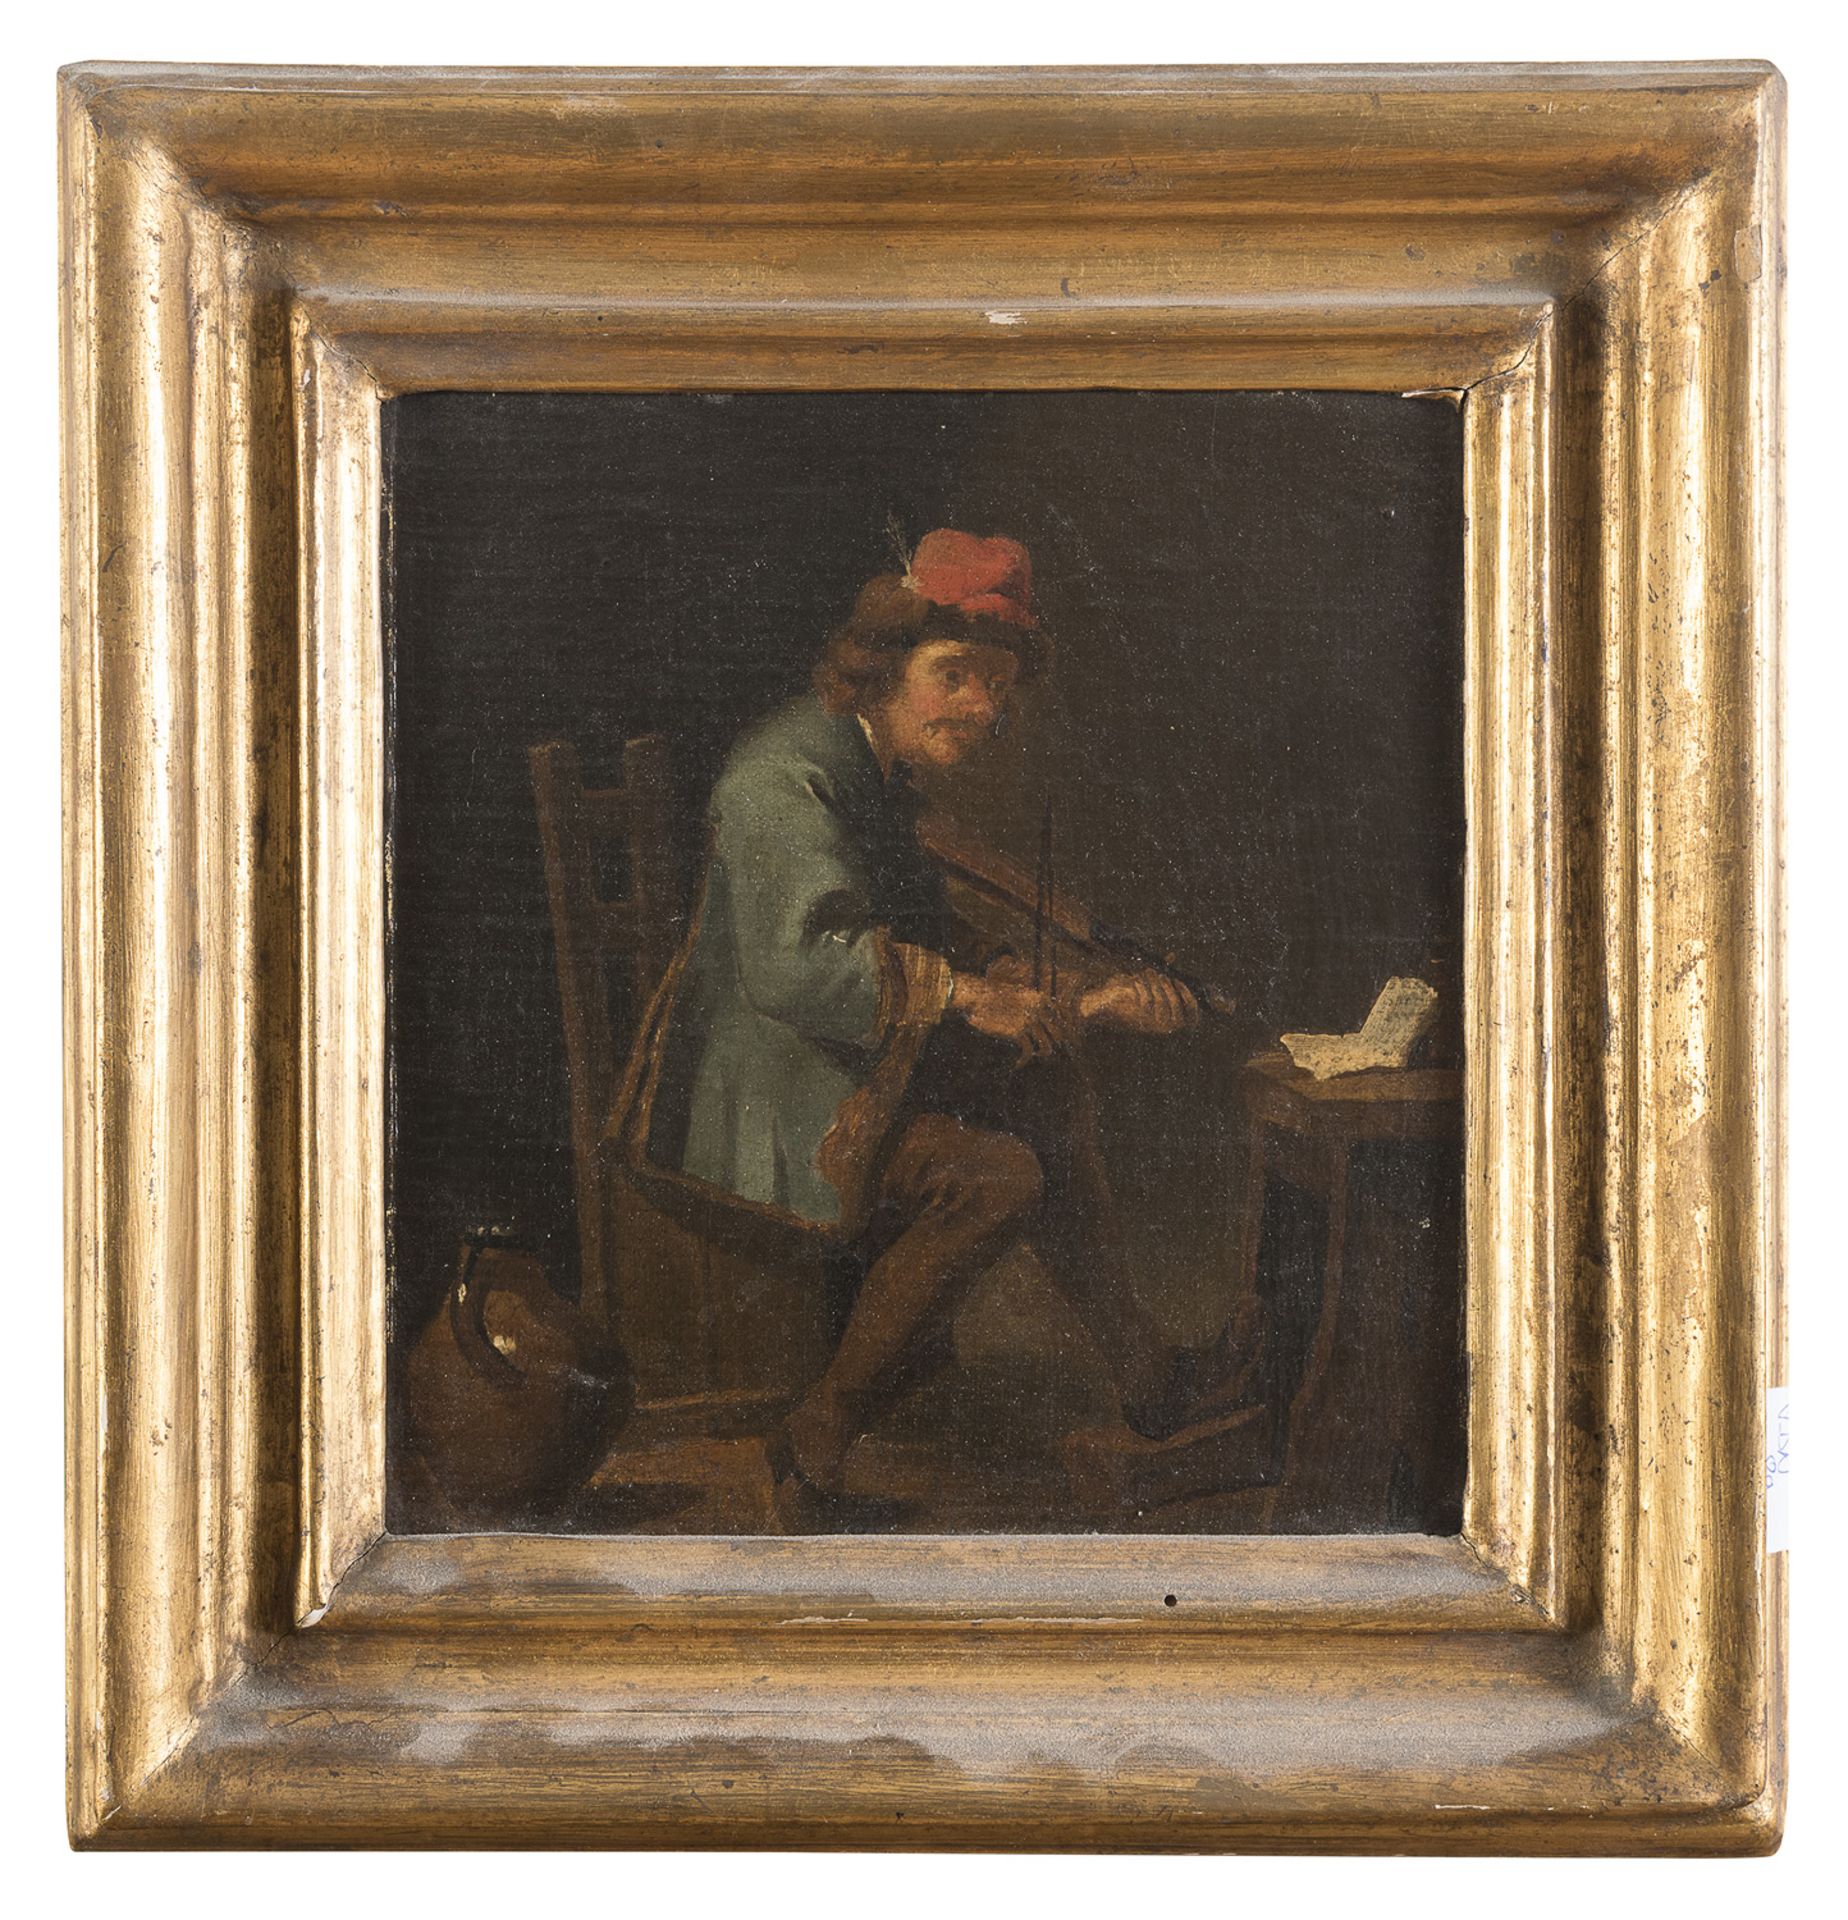 FLEMISH OIL PAINTING OF VIOLIN PLAYER LATE 18TH EARLY 19TH CENTURY